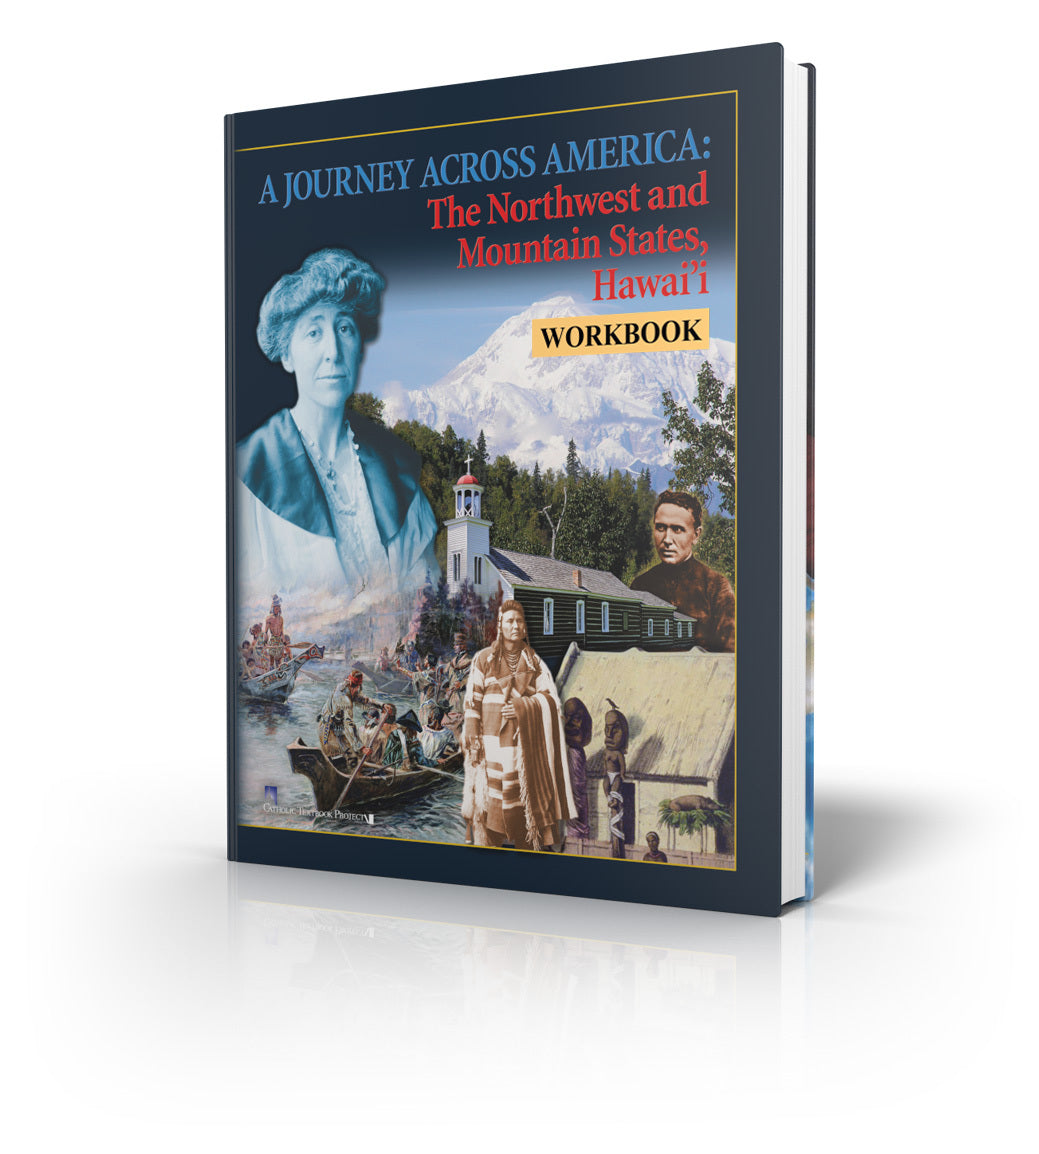 A Journey Across America: The Northwest and Mountain States, Hawai'i (Workbook)